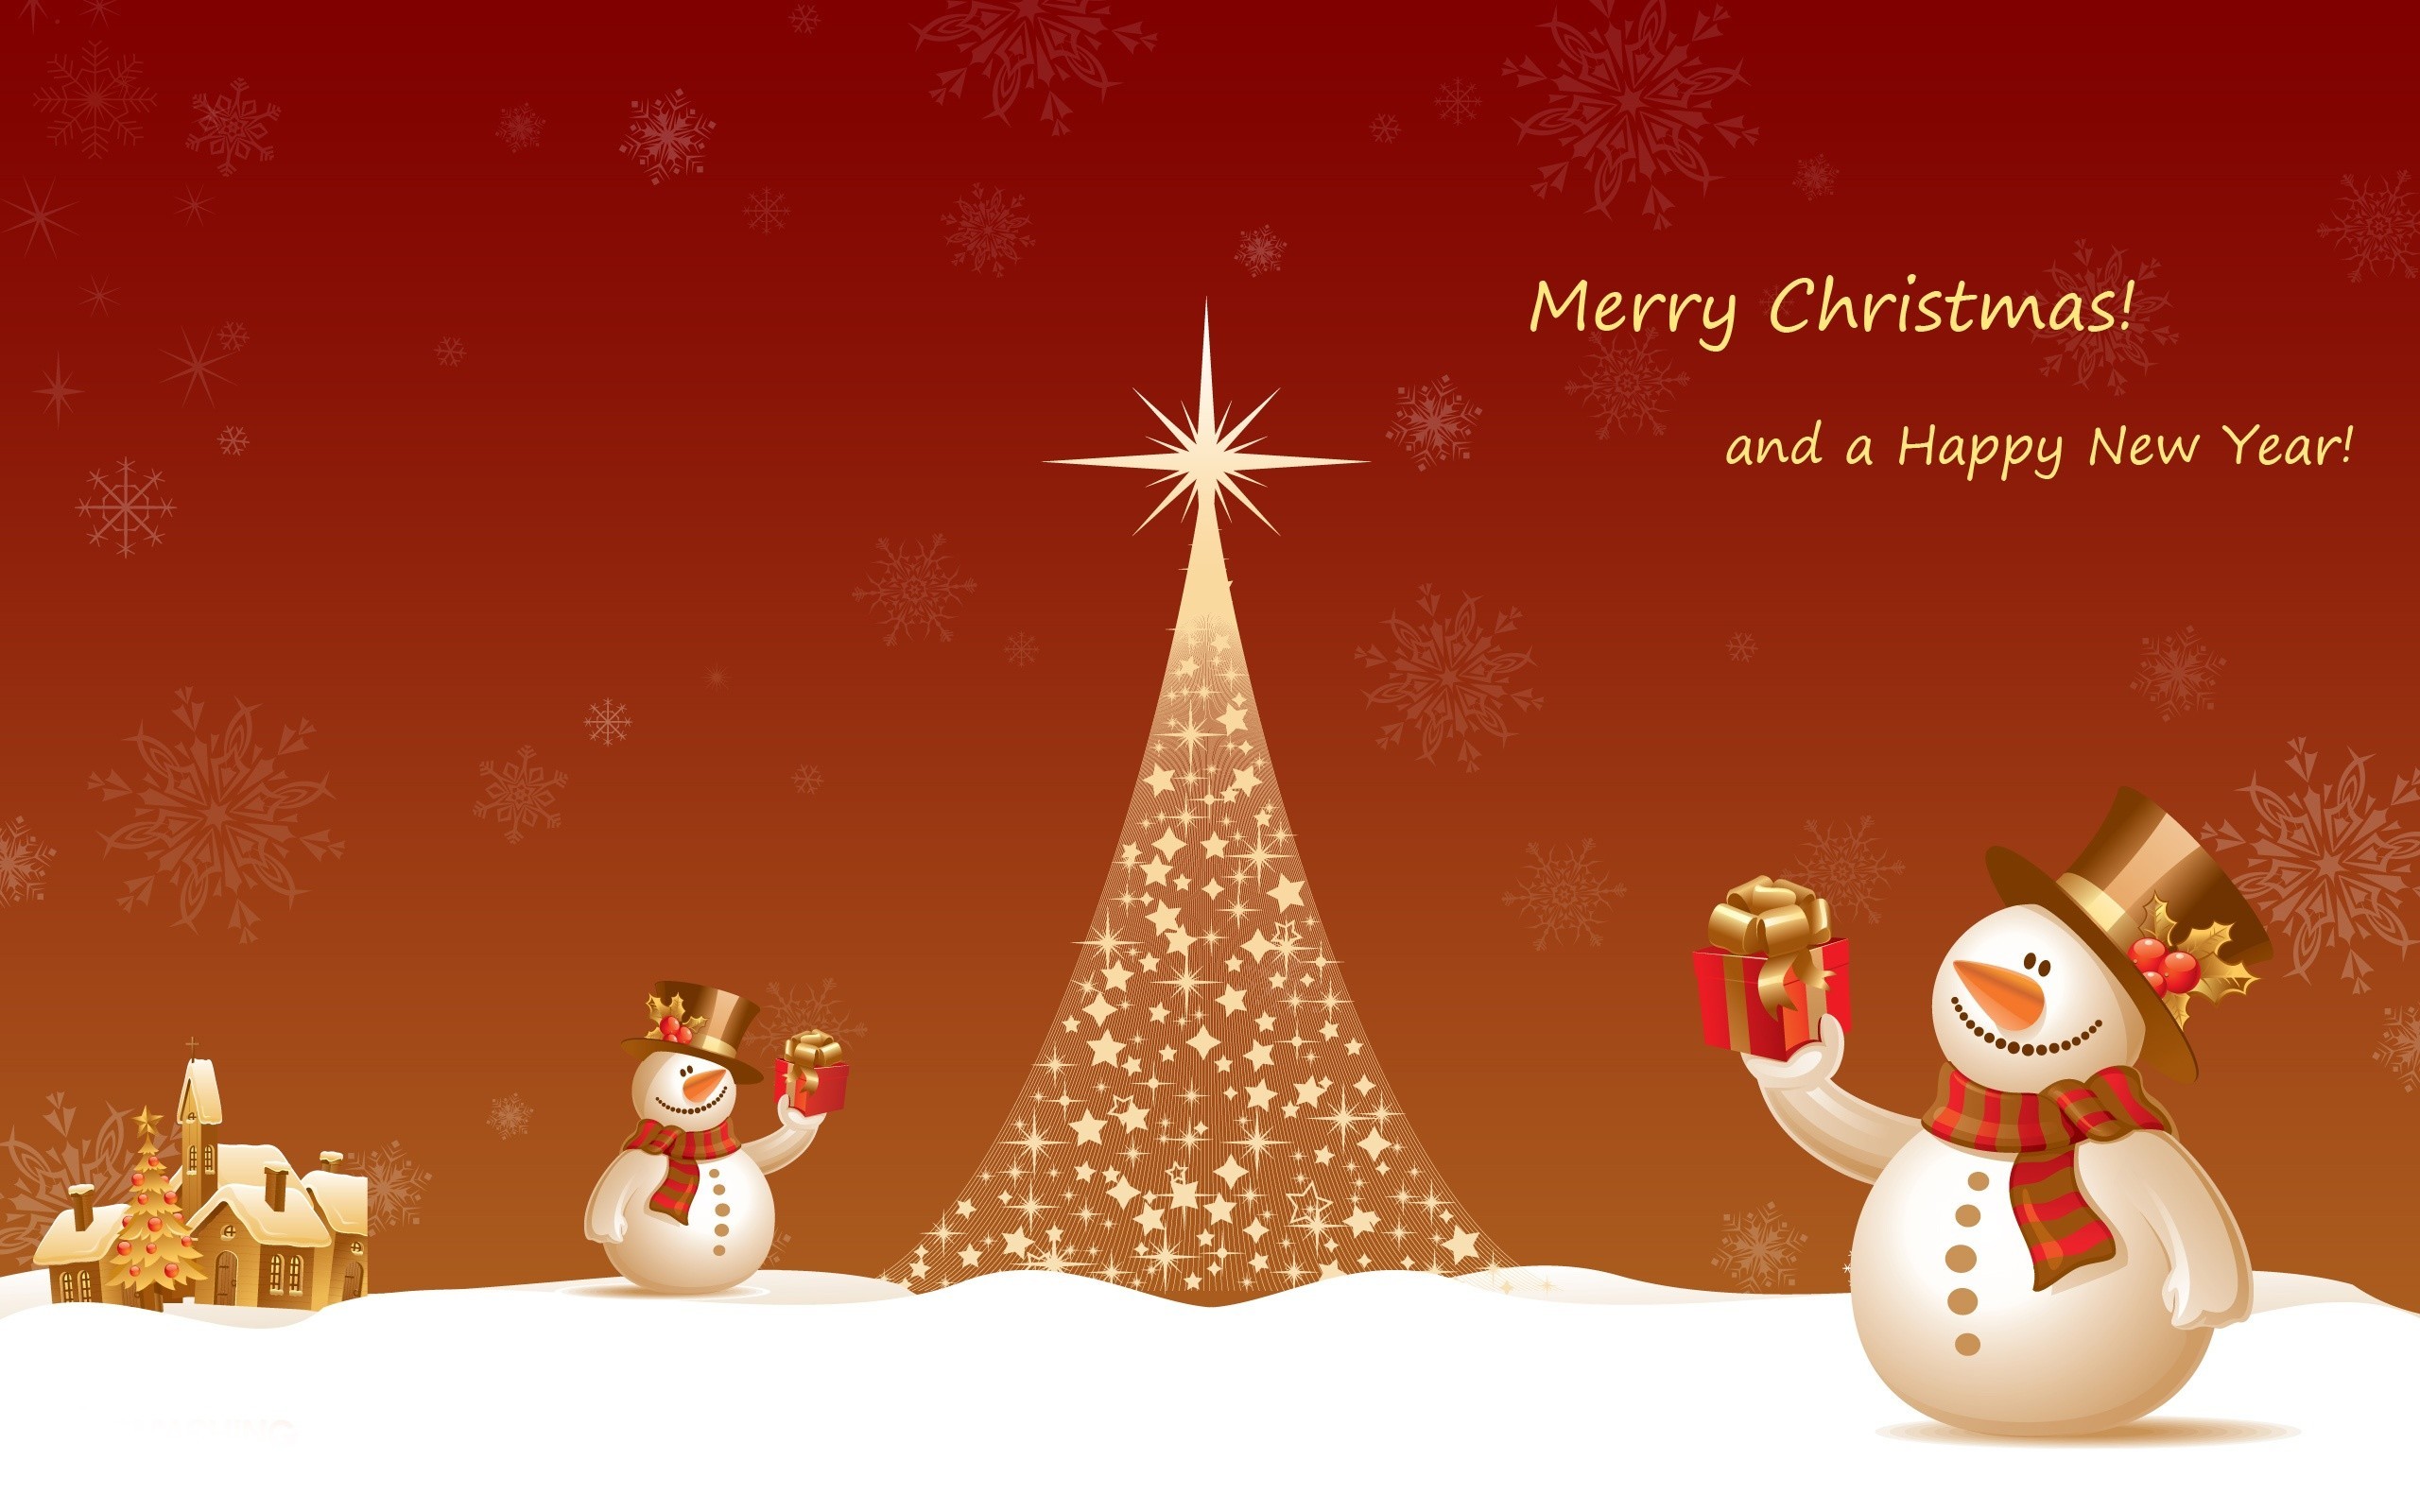 Free download Merry Christmas Wallpapers Xmas HD Desktop Backgrounds